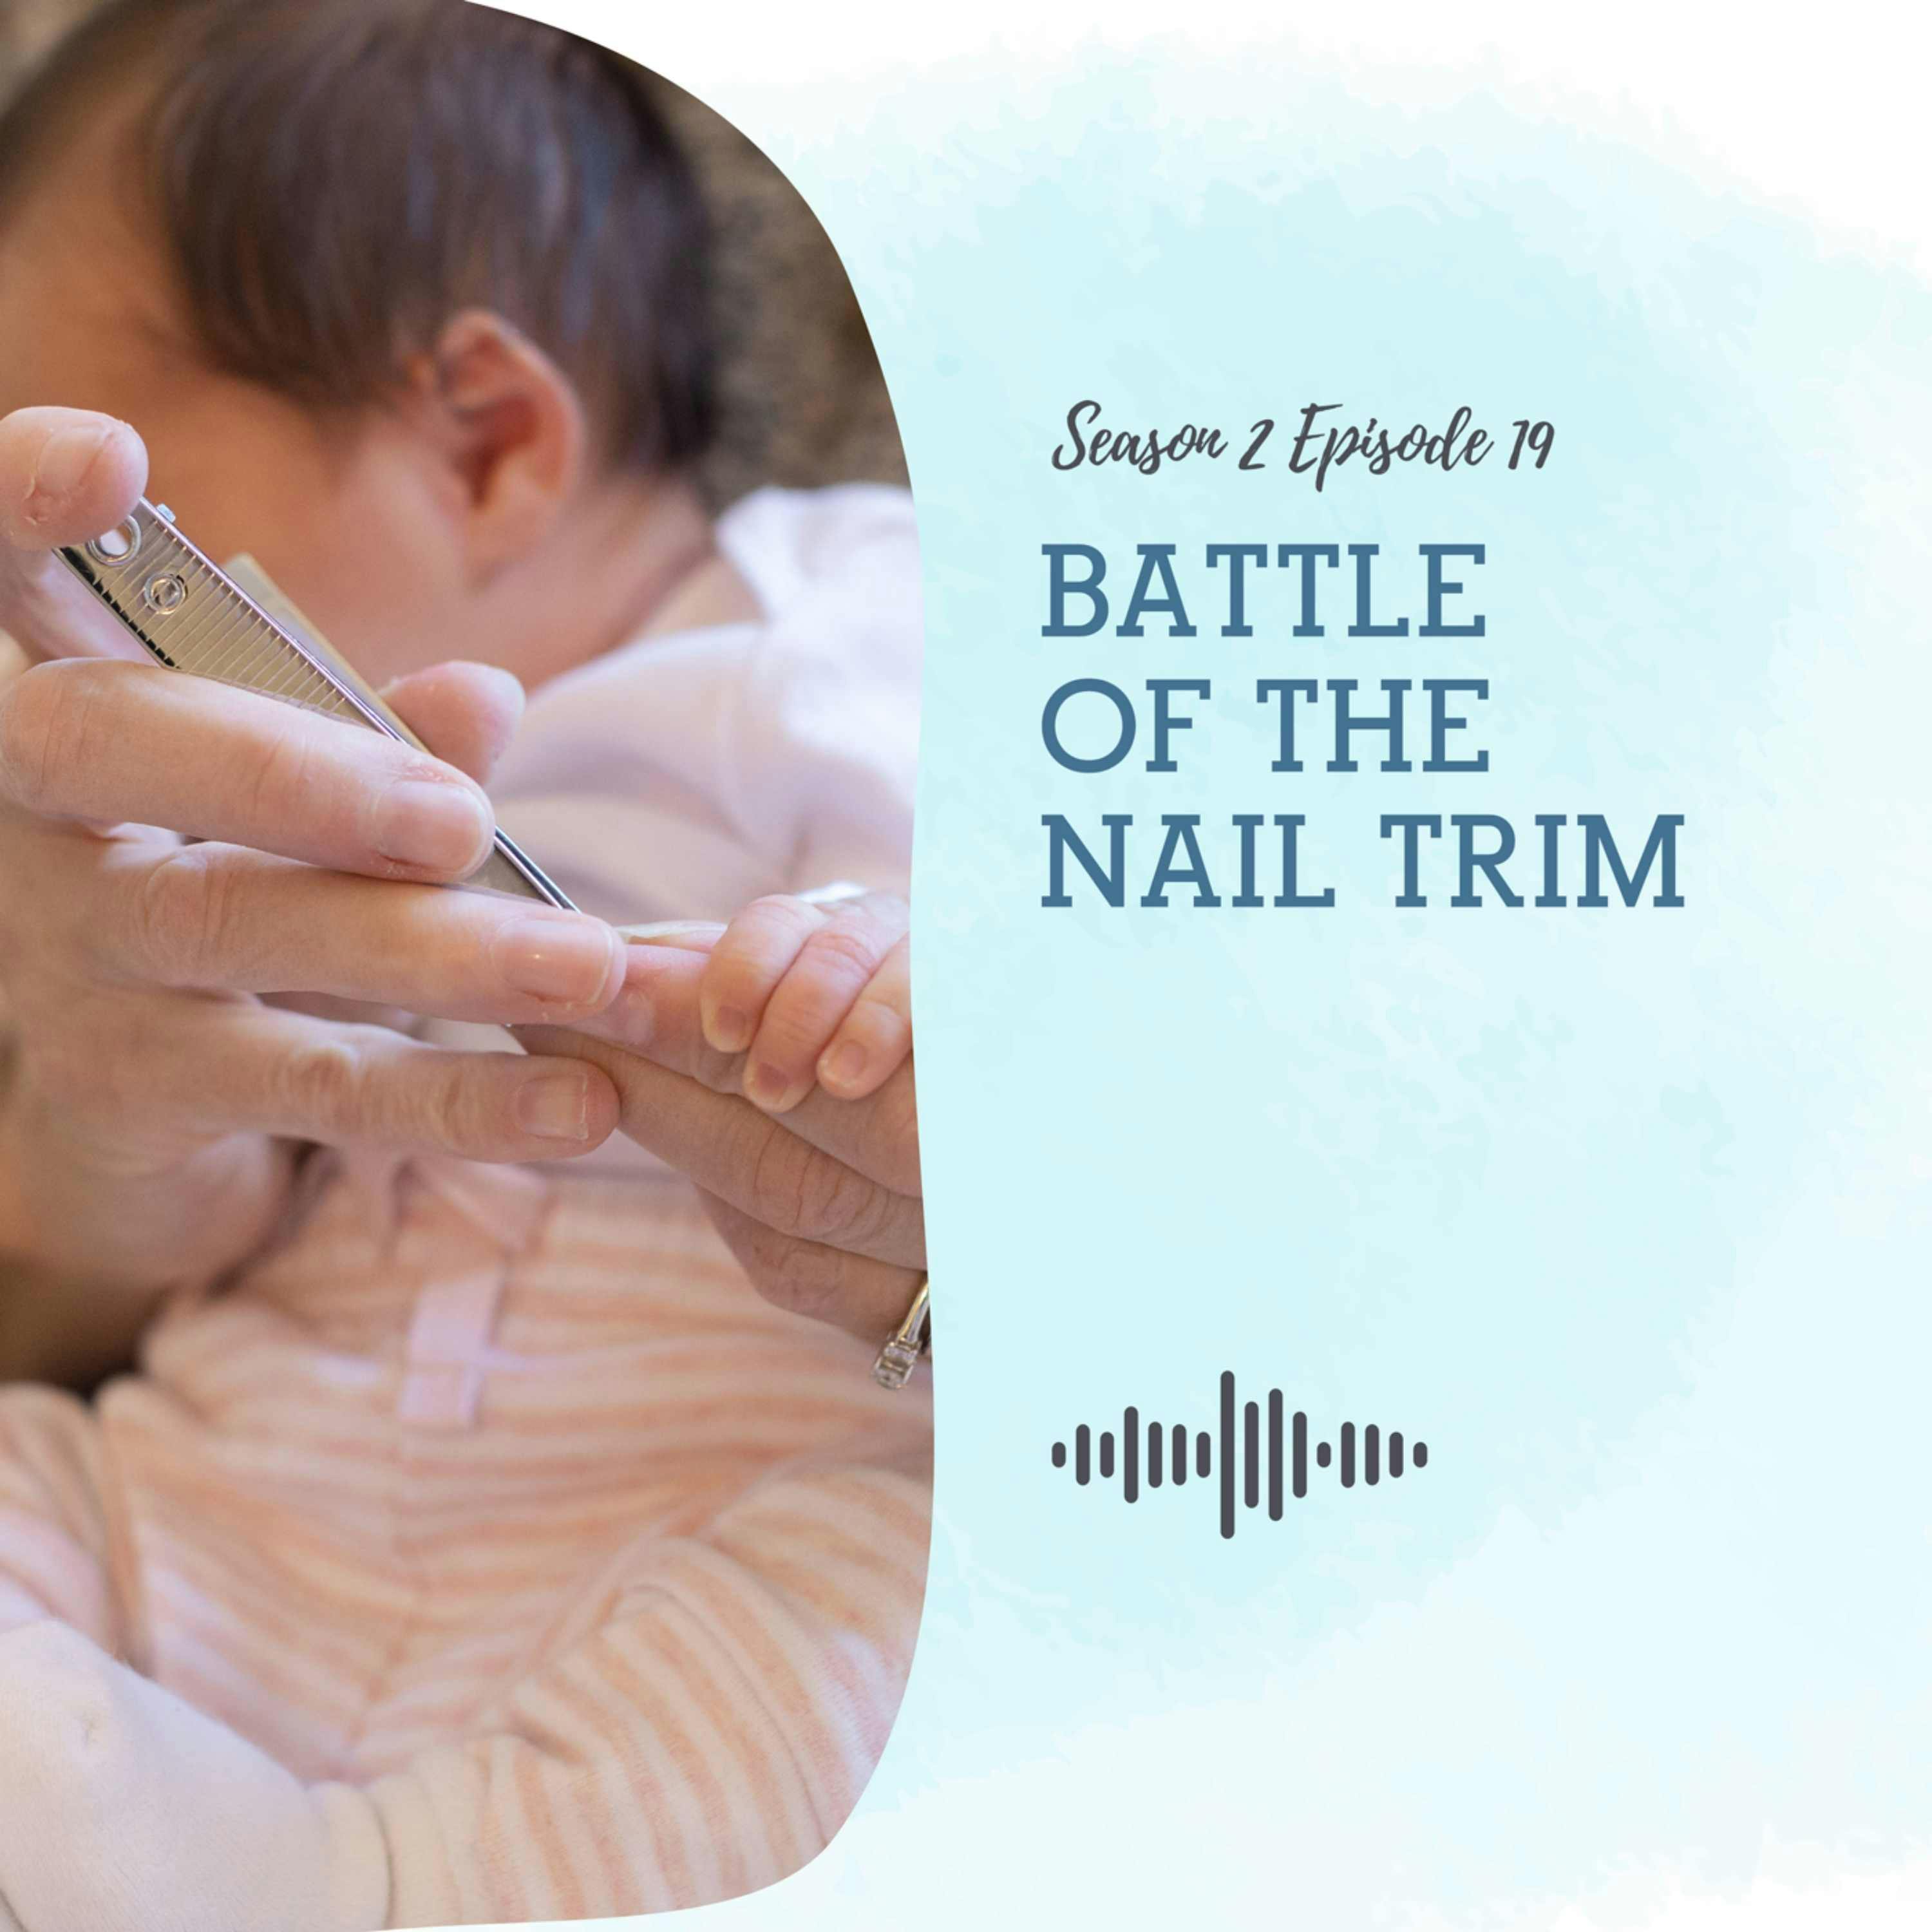 S2 EP19:  BATTLE OF THE NAIL TRIM